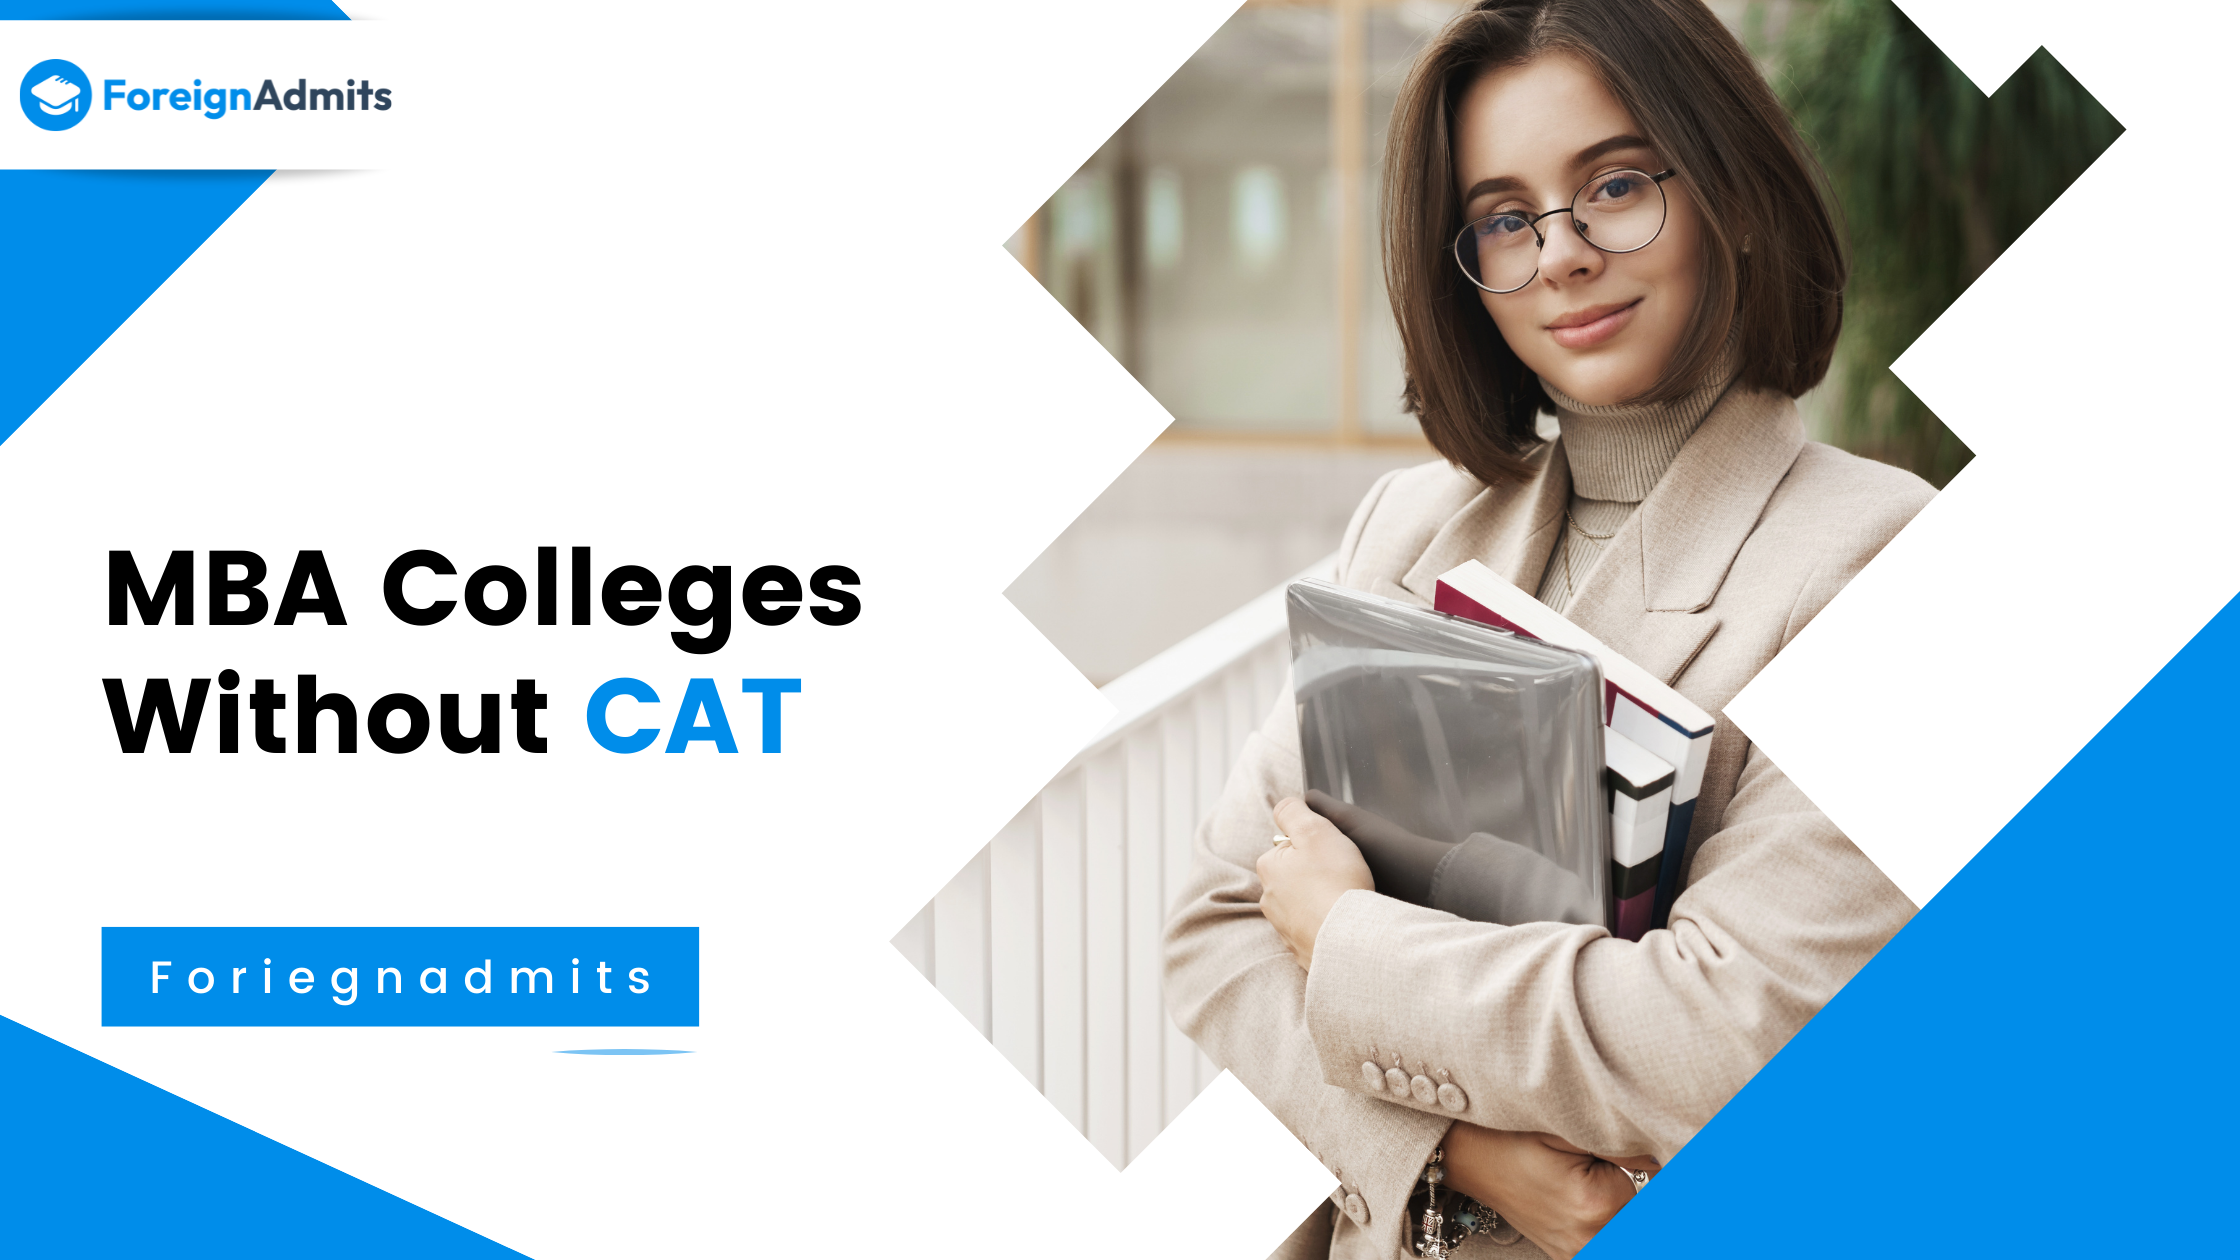 MBA Colleges Without CAT